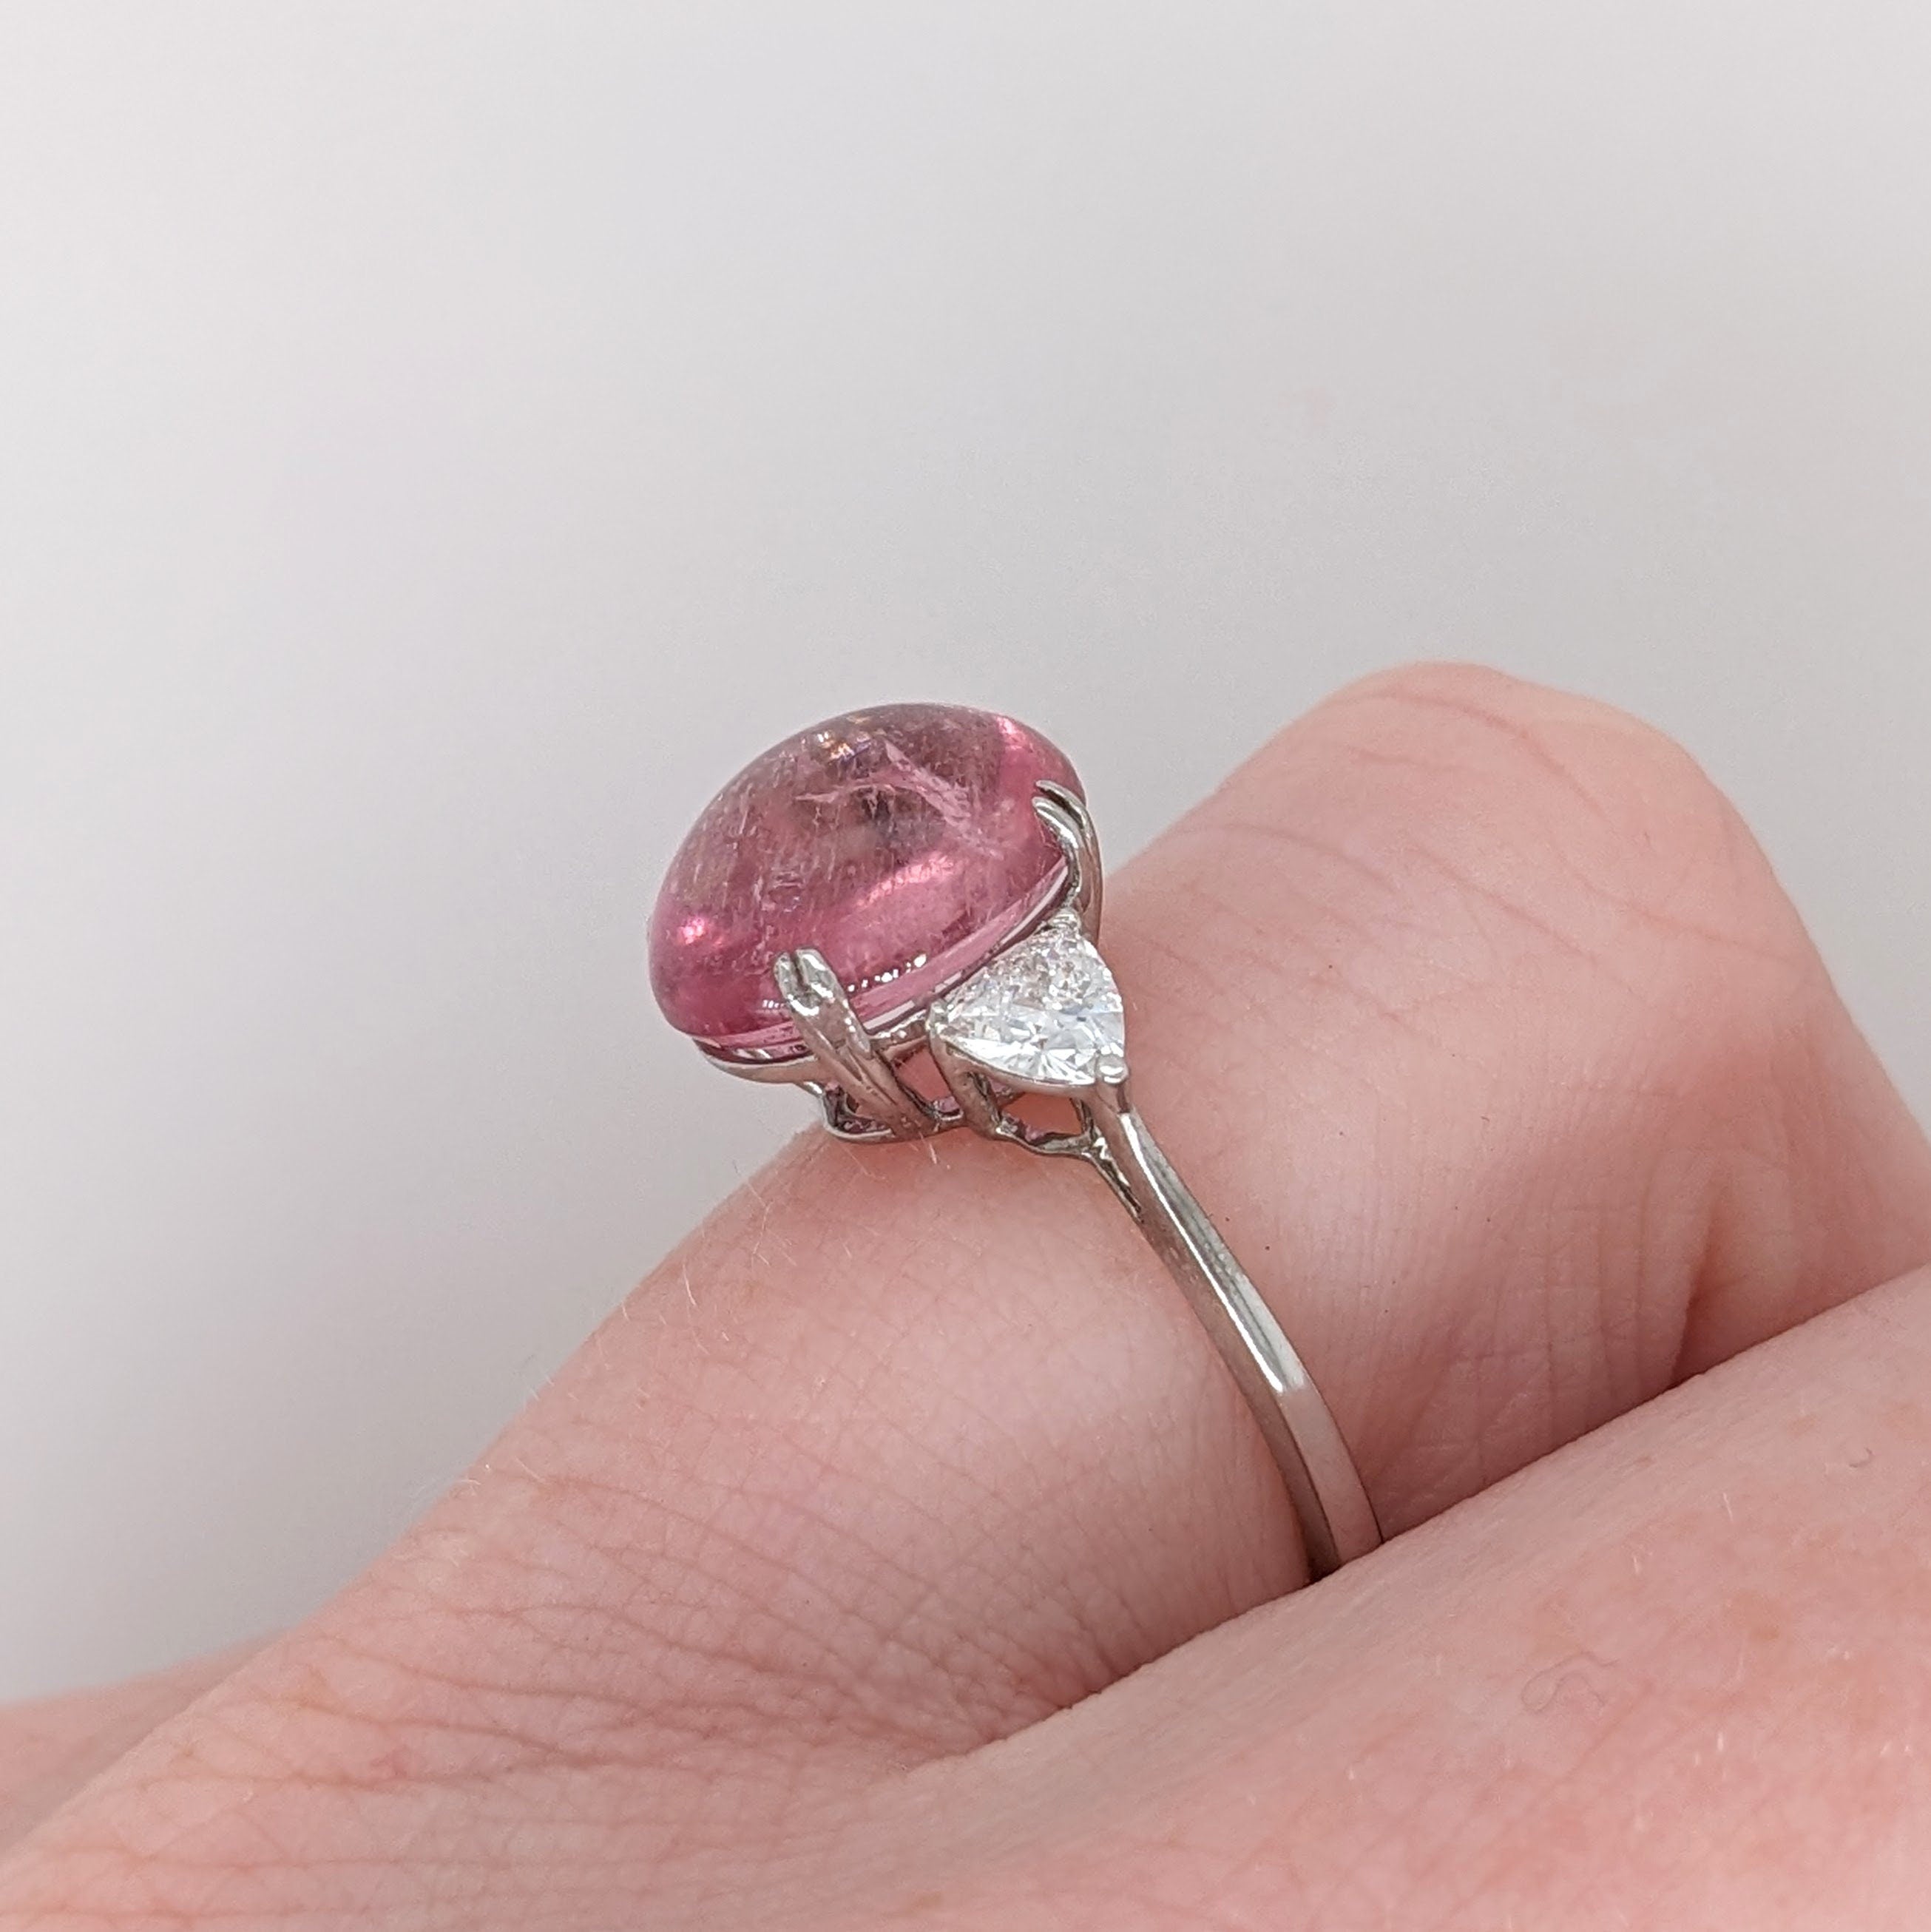 Statement Rings-Bubblegum Pink Tourmaline Ring w Lab Diamond Accents in Solid 14K White Gold | Oval 11x9mm | Pink Gemstone Ring | Statement | - NNJGemstones